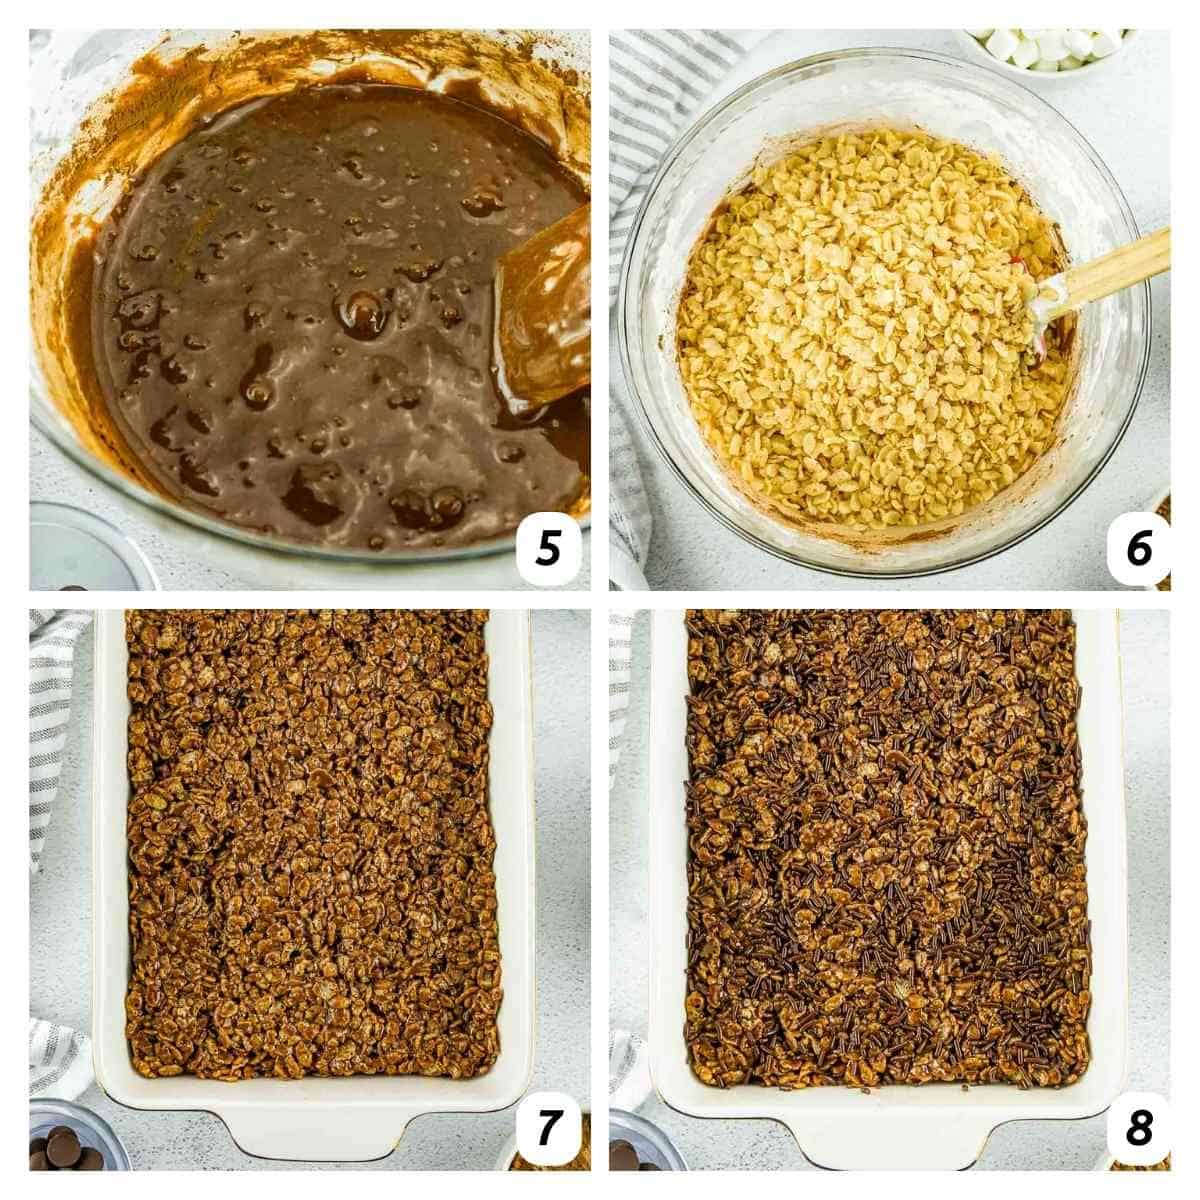 Four panel grid of process shots 5-8 - mixing Rice Krispies cereal with the chocolate marshmallow mixture, spreading mixture onto a pan, adding chocolate sprinkles, and letting cool.